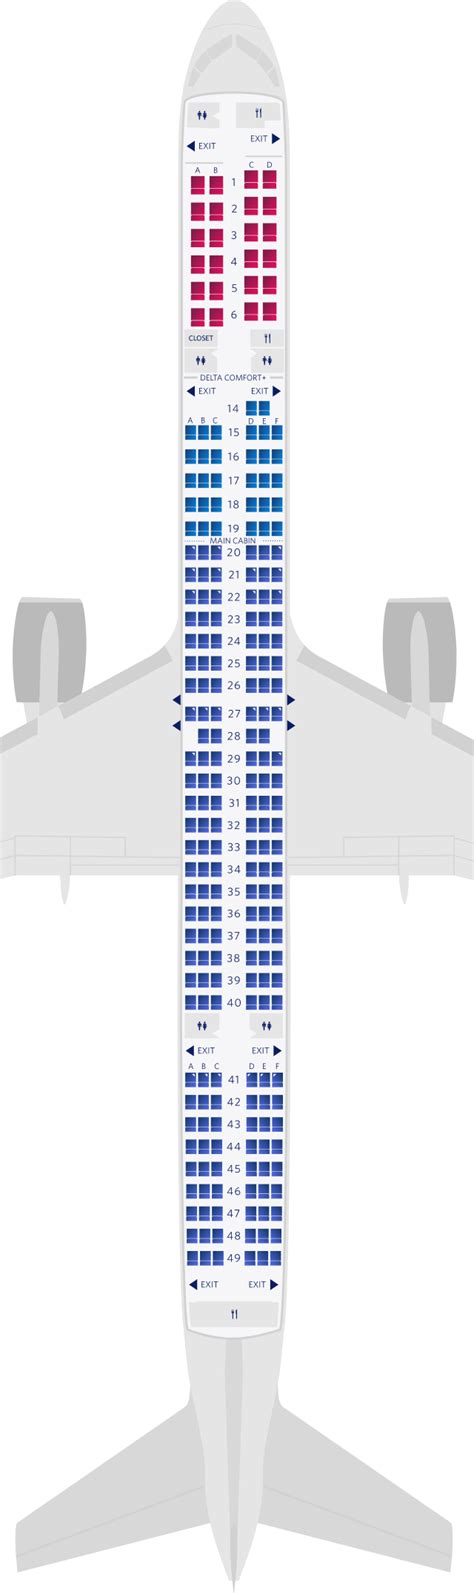 757-300 seat map delta. Standard Economy (Rows 30-57) View map. Boeing 777-200ER/LR (7CB) Layout 1. Closed Suite Delta One (Rows 1-8) Recliner Delta Premium Select (Rows 20-25) Standard Delta Comfort+ (Rows 30-40) Standard Economy (Rows 44-57) Viewing. For your next Delta flight, use this seating chart to get the most comfortable seats, legroom, and recline on . 